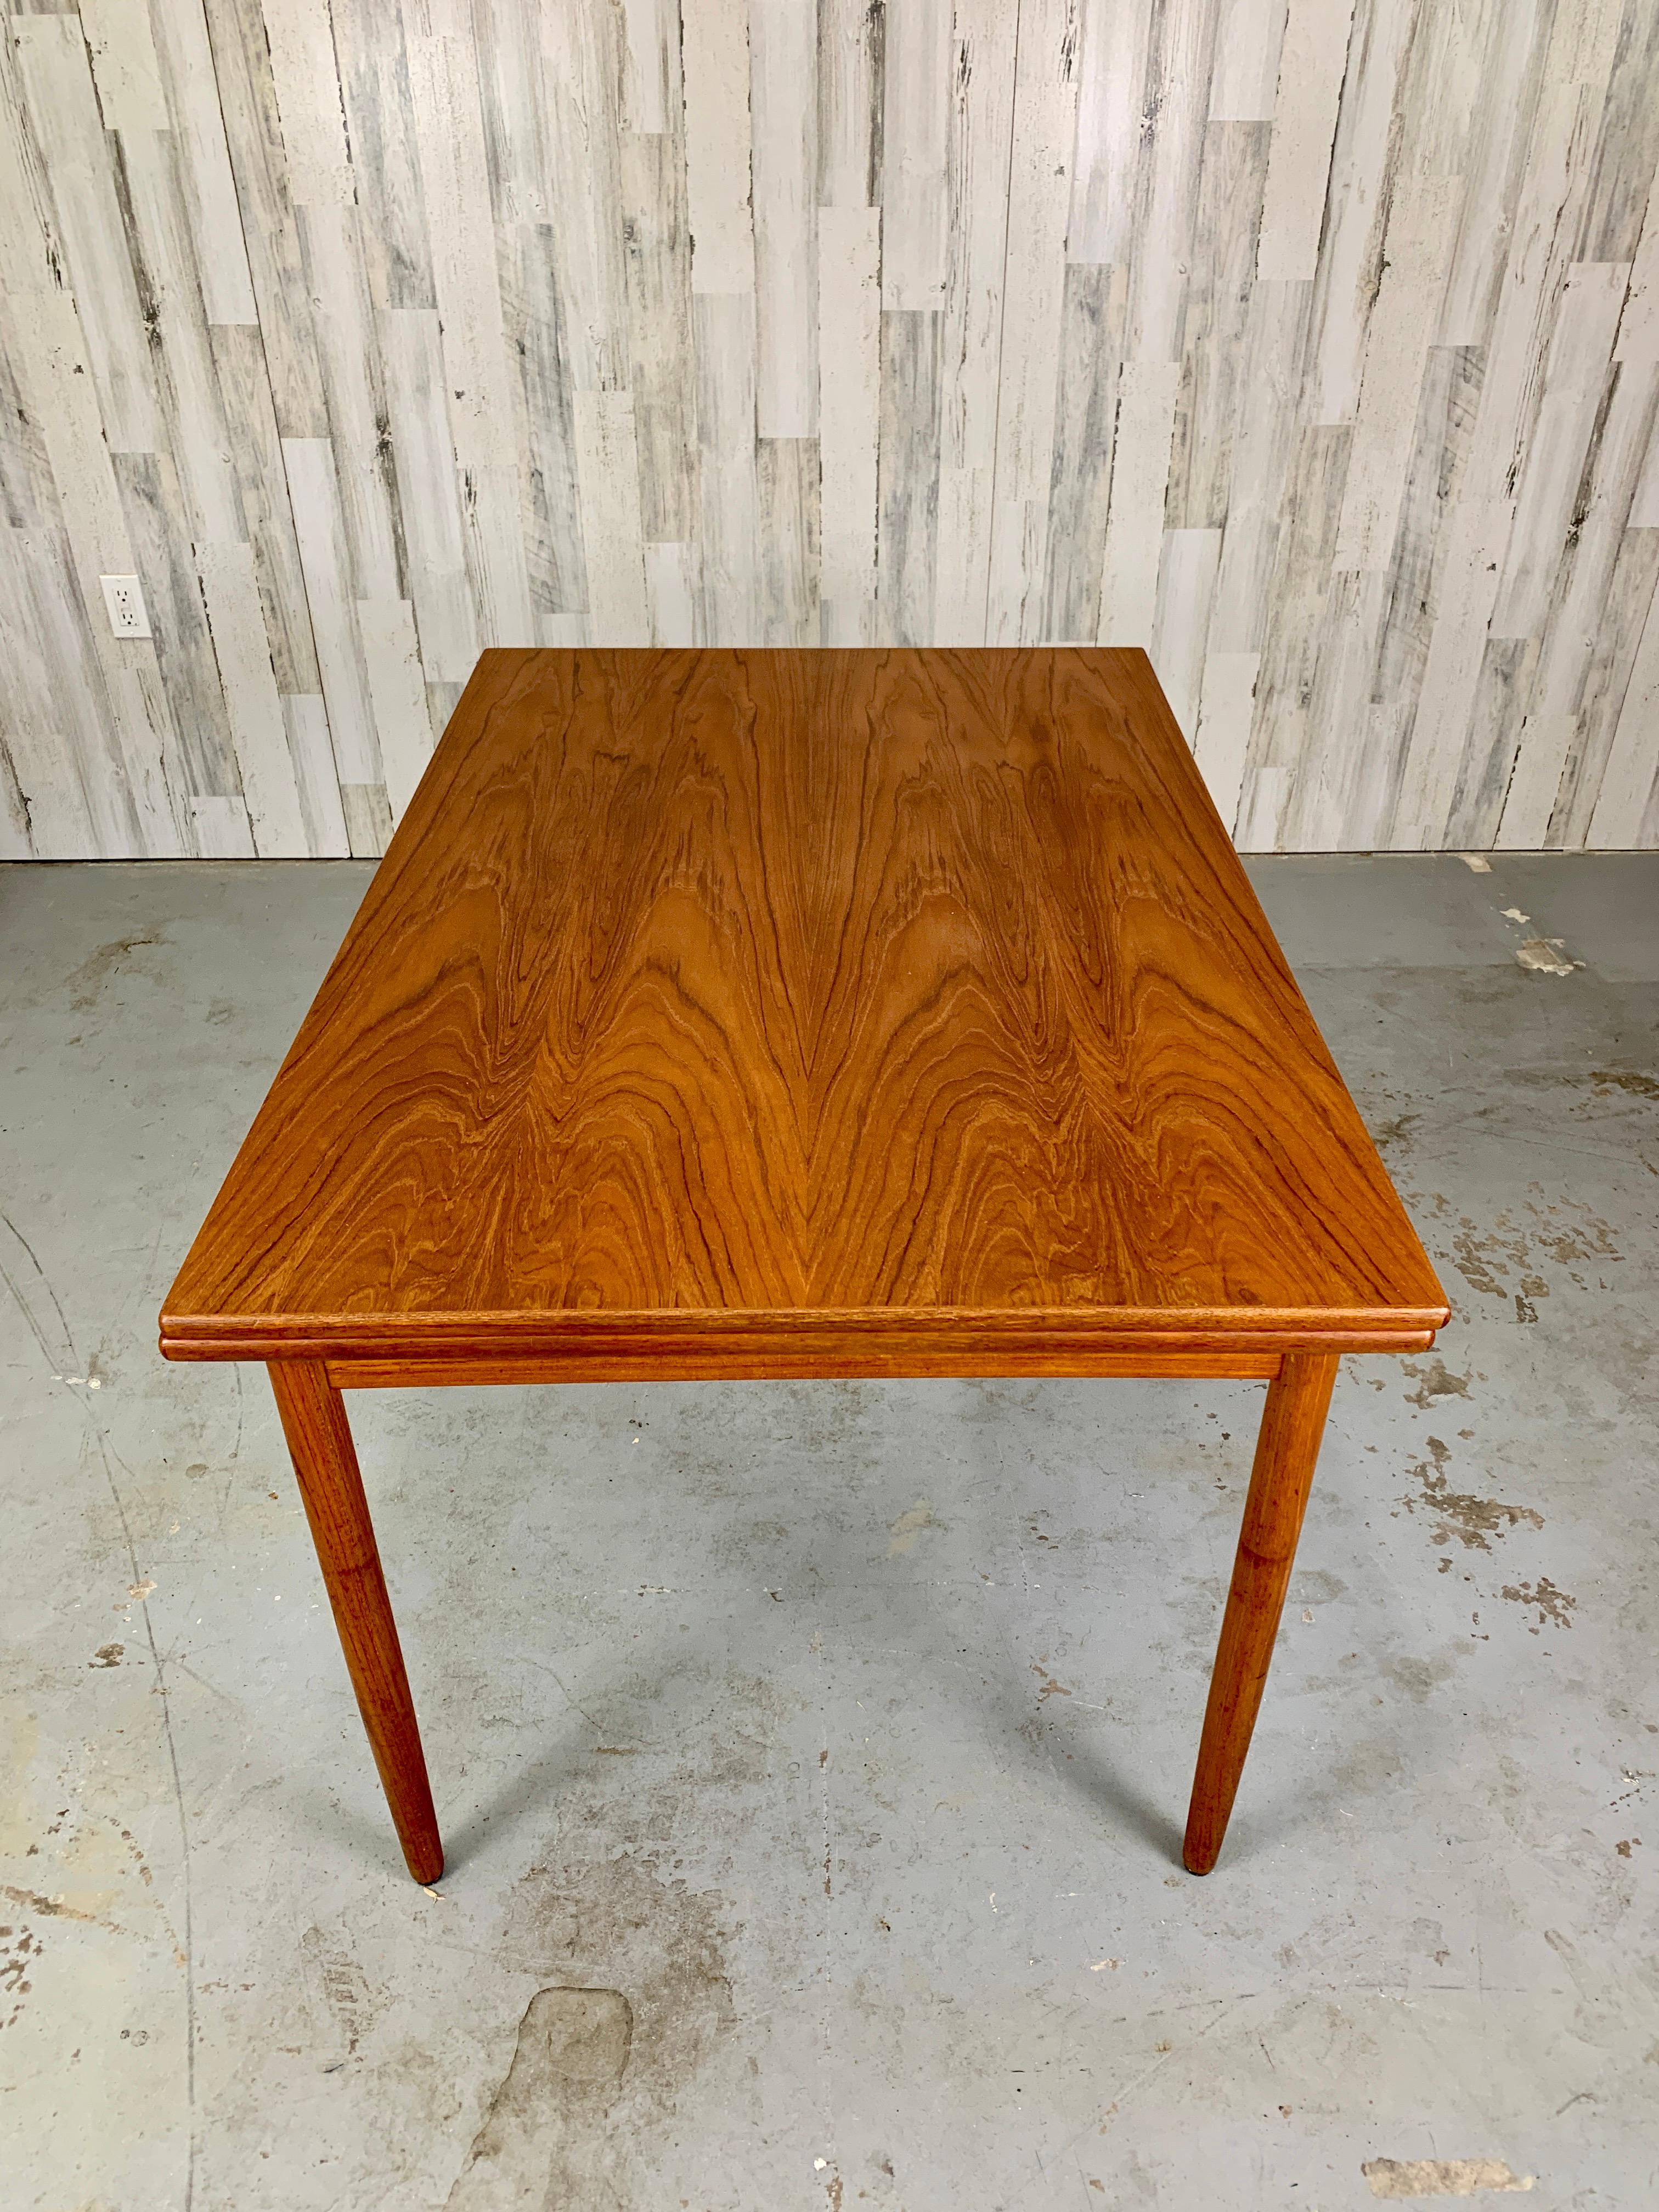 Danish teak dining table with draw leaf. Make in Denmark stamp on bottom. Chairs sold separately. 
Each leaf is 17.75 
Total length with both leafs is 86.75.
 